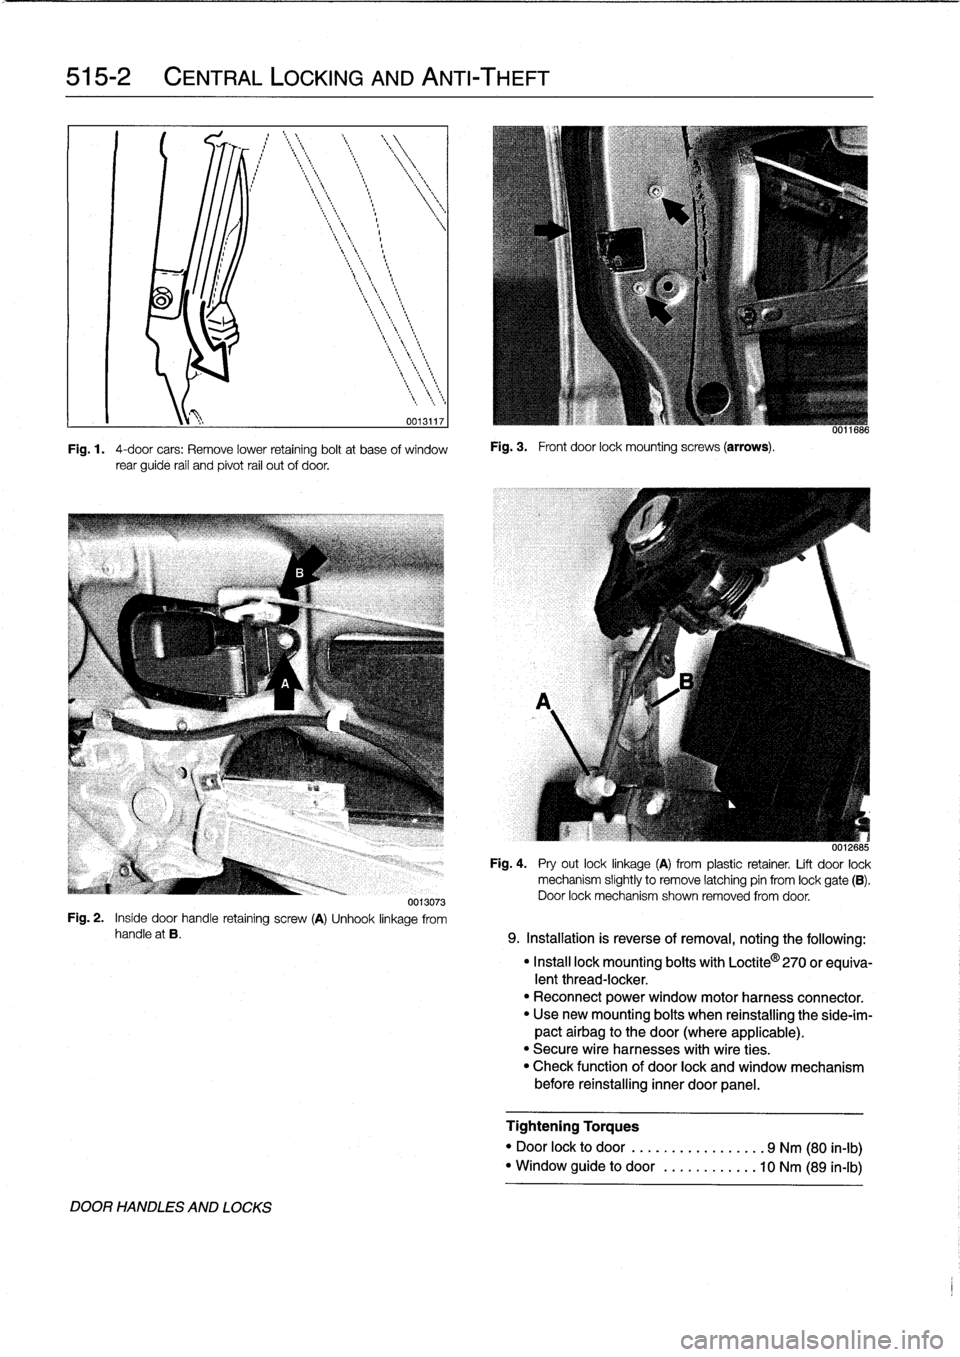 BMW 325i 1997 E36 Workshop Manual 
515-2

	

CENTRAL
LOCKING
AND
ANTI-THEFT

0013117

Fig
.
1
.

	

4-door
cars
:
Remove
lower
retaining
boltat
base
of
window
rear
guide
rail
and
pivot
rail
out
of
door
.

Fig
.
3
.

	

Front
door
lock